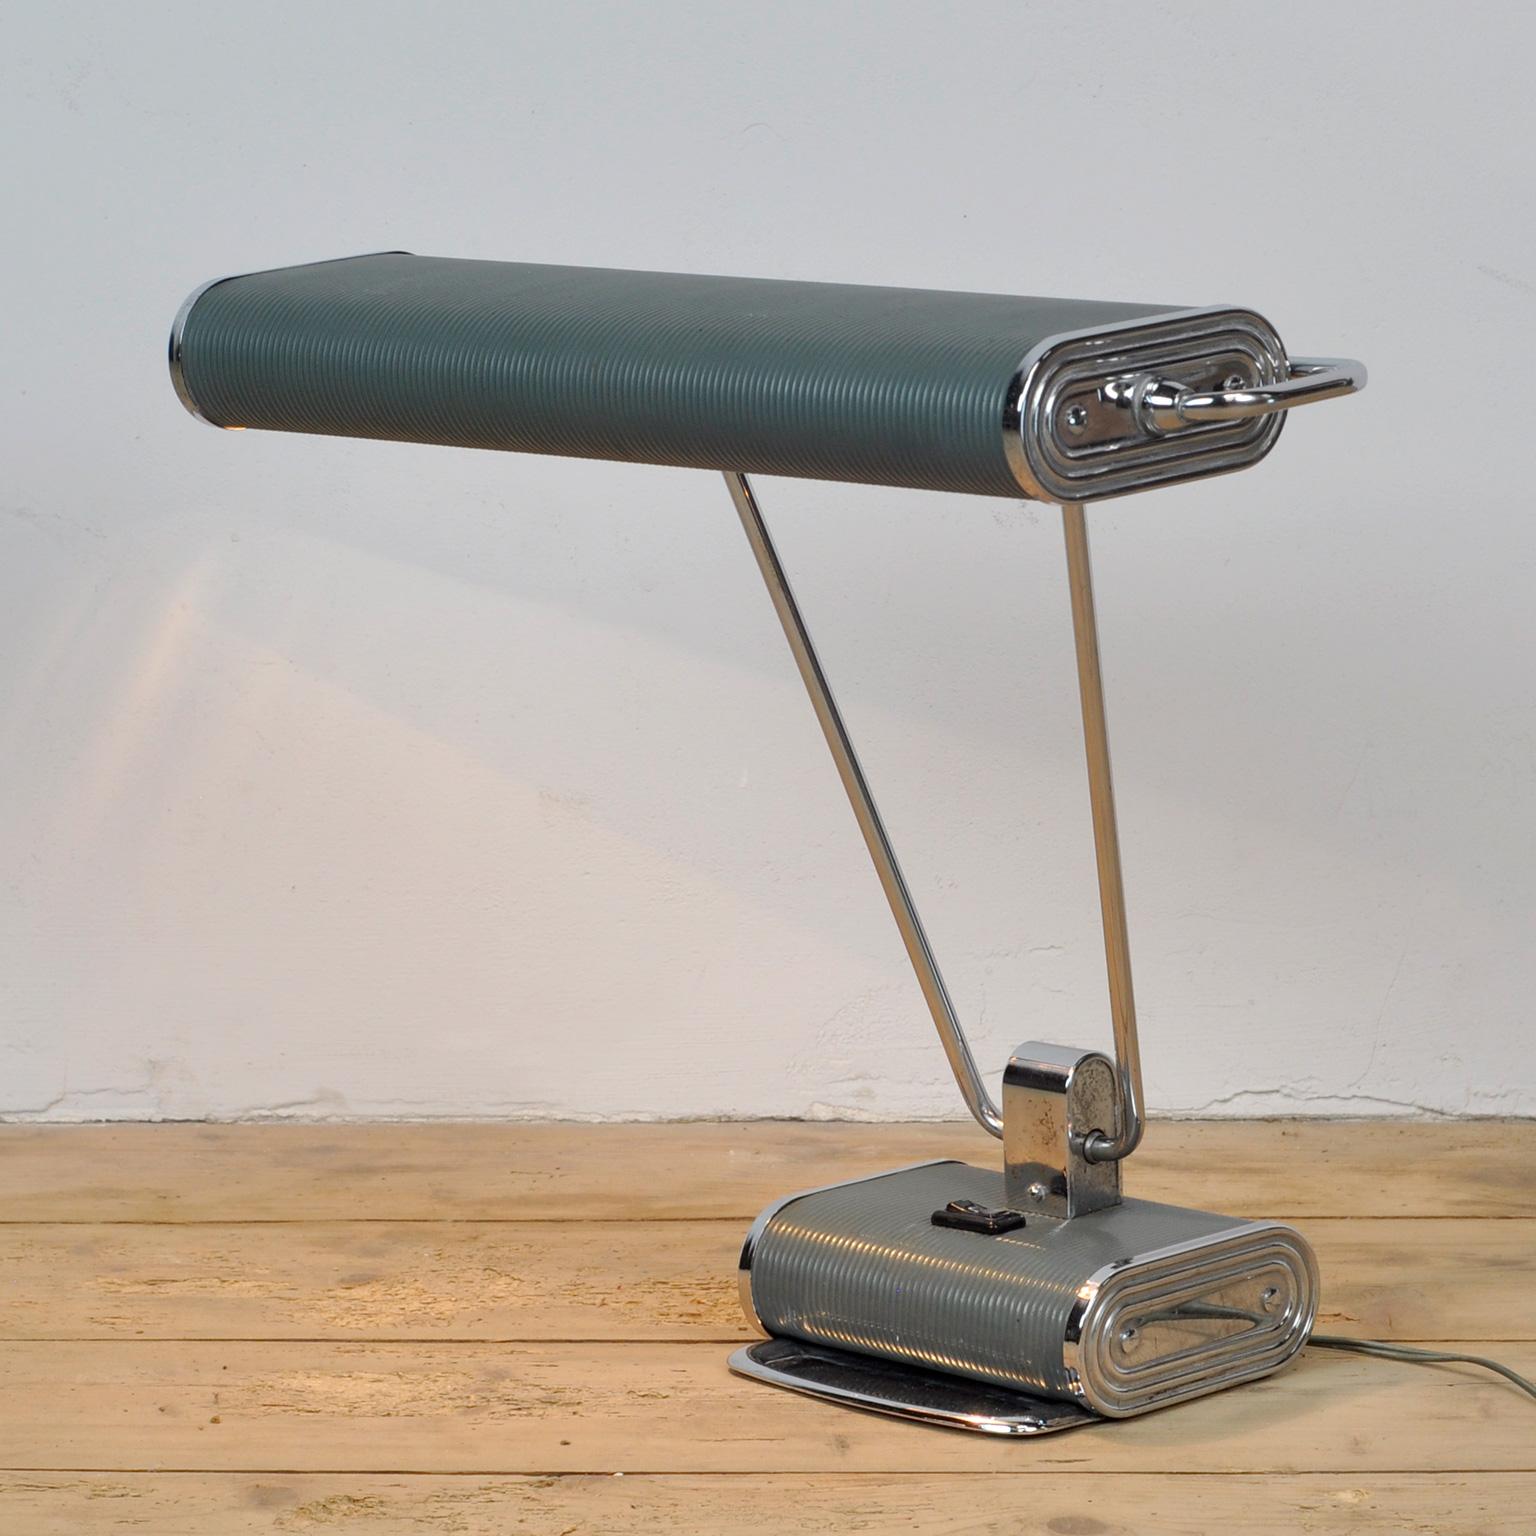 Lamp for Jumo in France circa 1950. The lamp consists of corrugated steel and the original grey-painted and chromed brass pipe. The long double arm can be tilted forward as well as backward and the wide reflector screen can be turned around its own